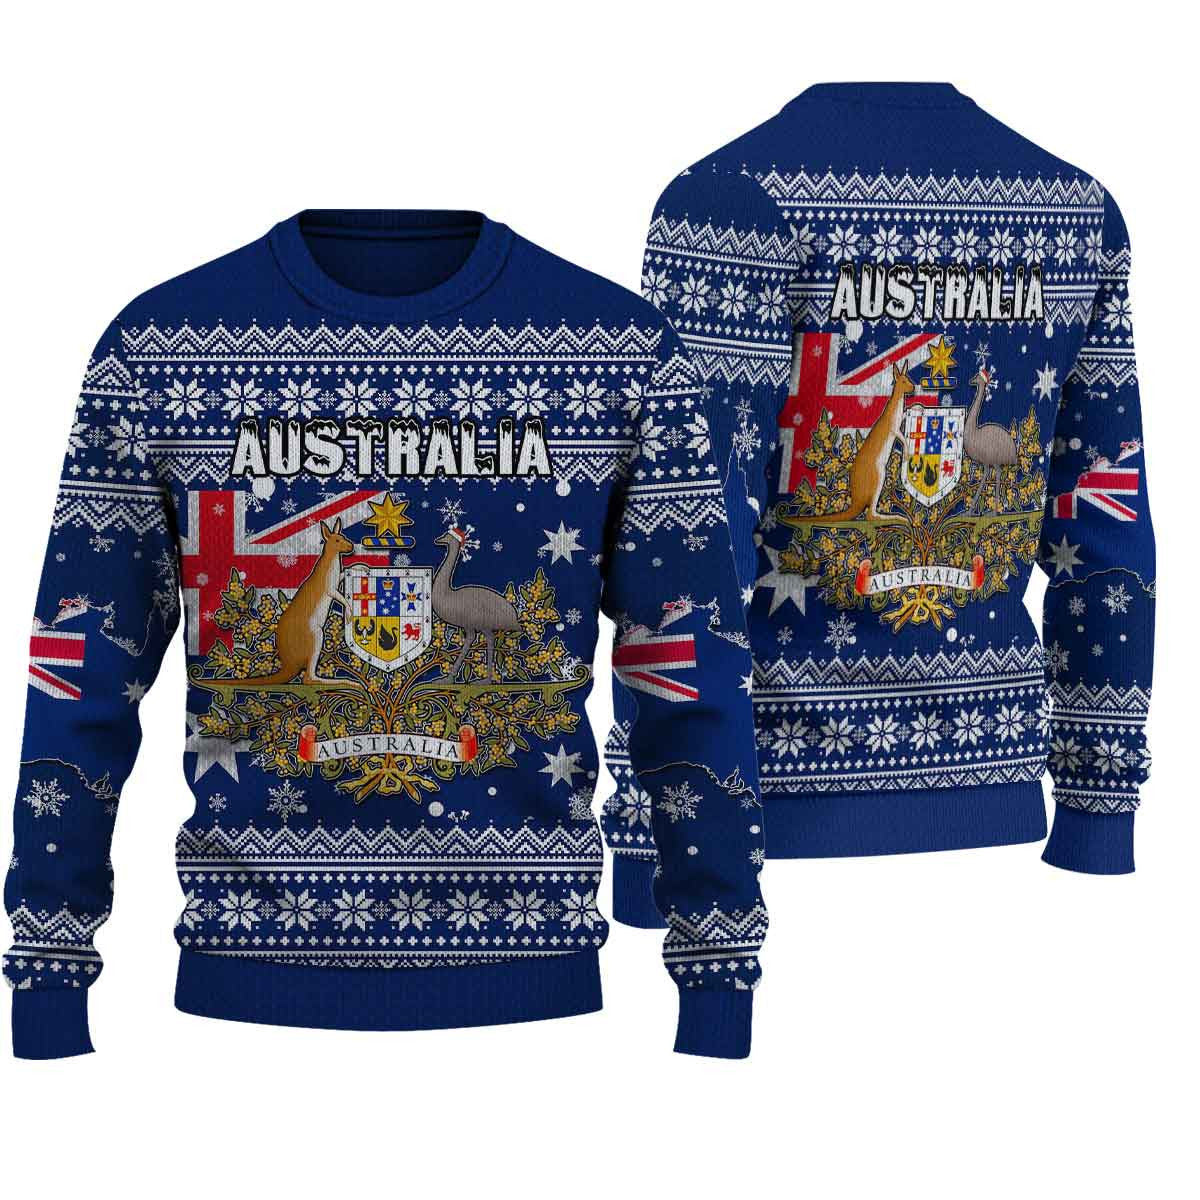 wonder-print-shop-ugly-sweater-australia-christmas-knitted-sweater